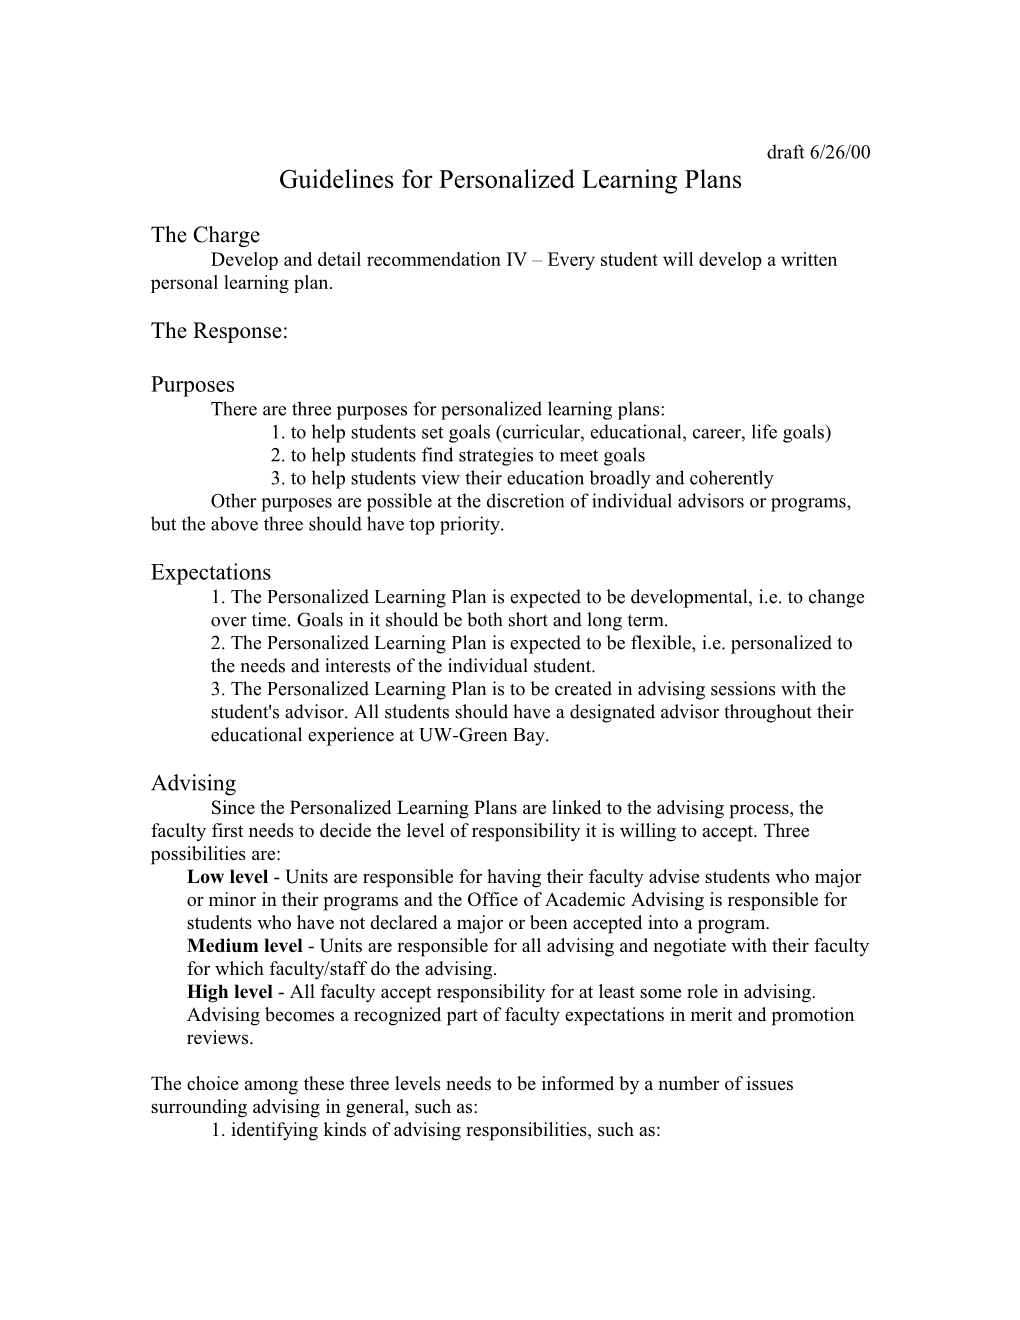 Guidelines for Personalized Learning Plans